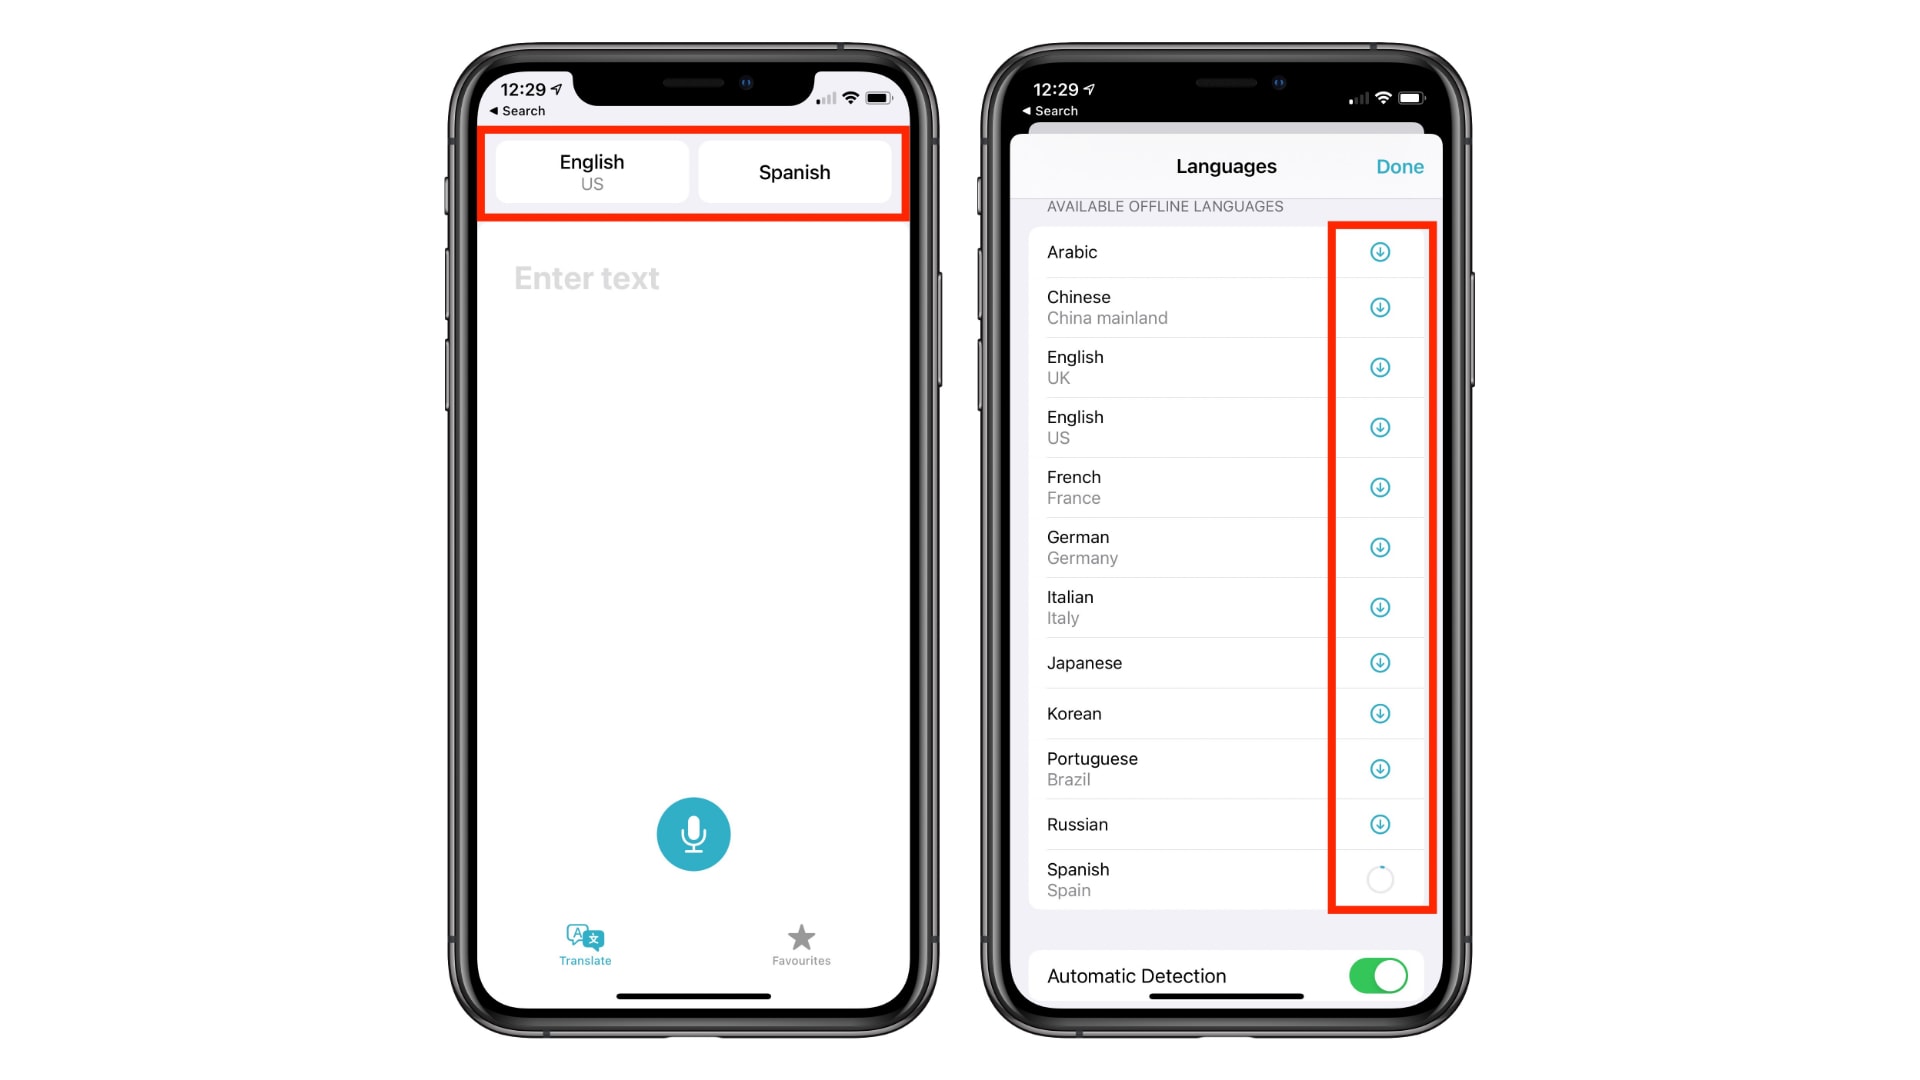 Download languages to use iOS 14's new Translate app offline